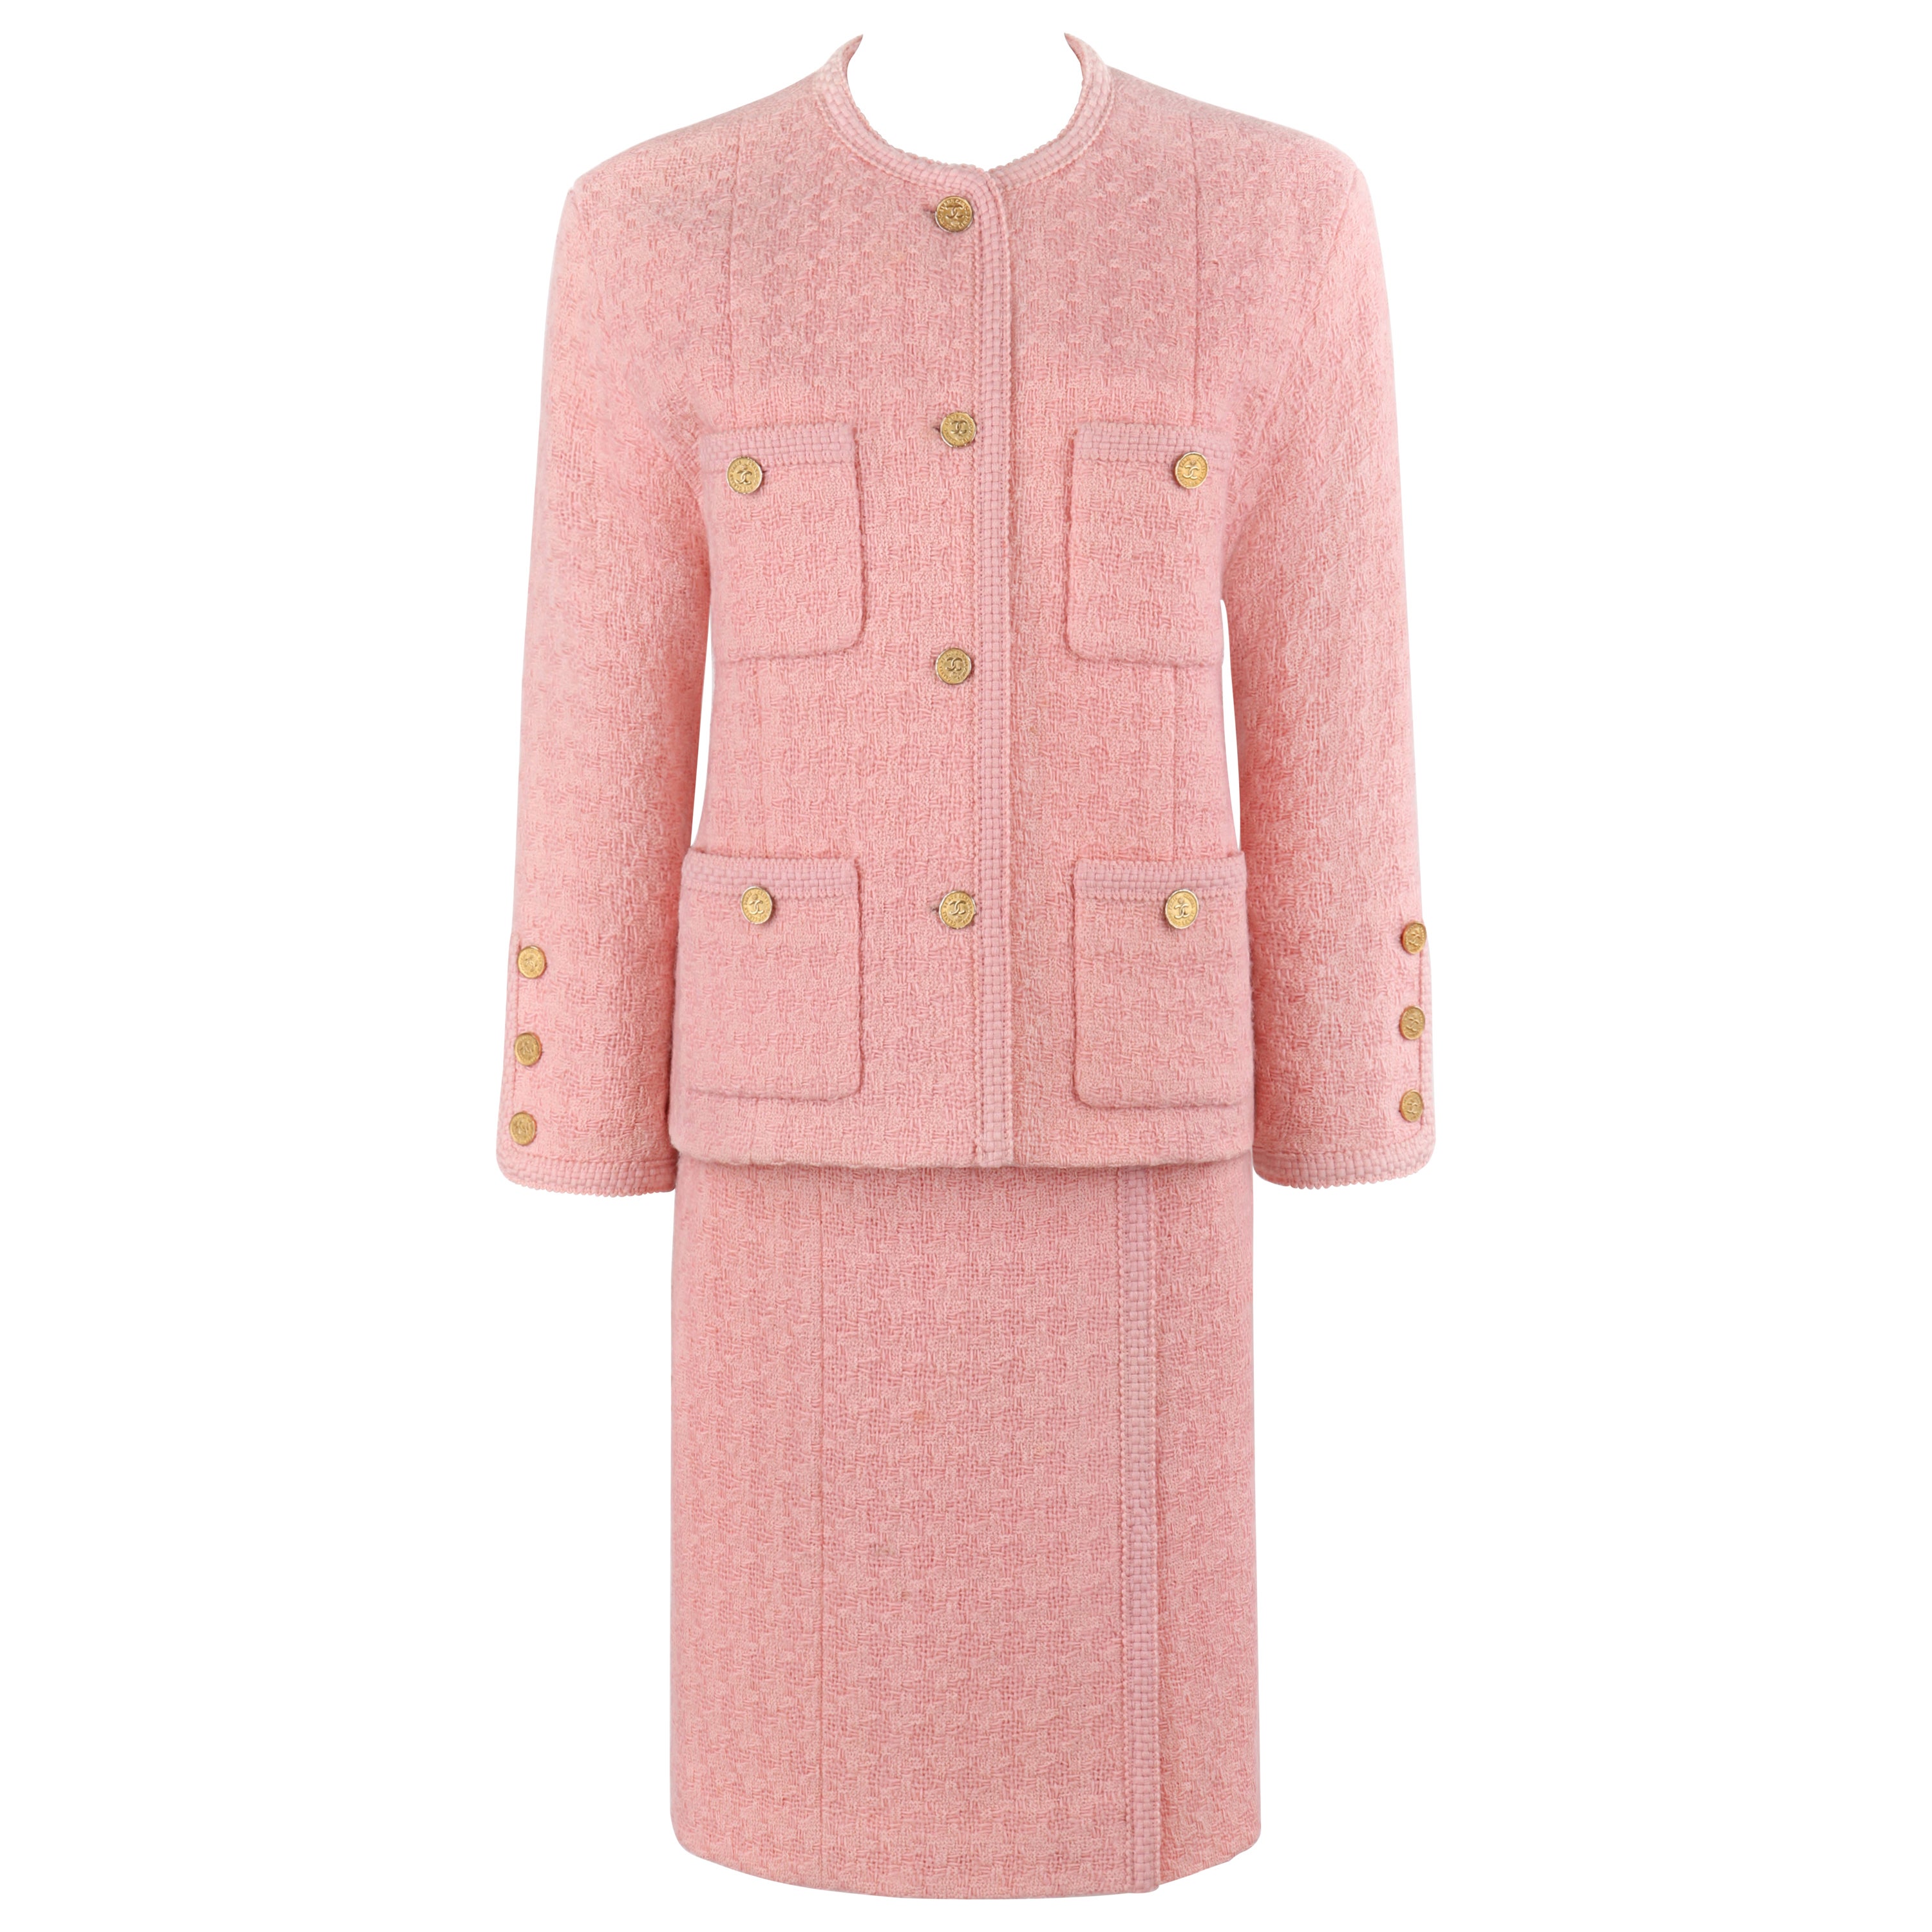 Chanel C.1980's 2pc Pink Gold Button-Up Tweed Woven Trim Jacket Skirt Suit Set